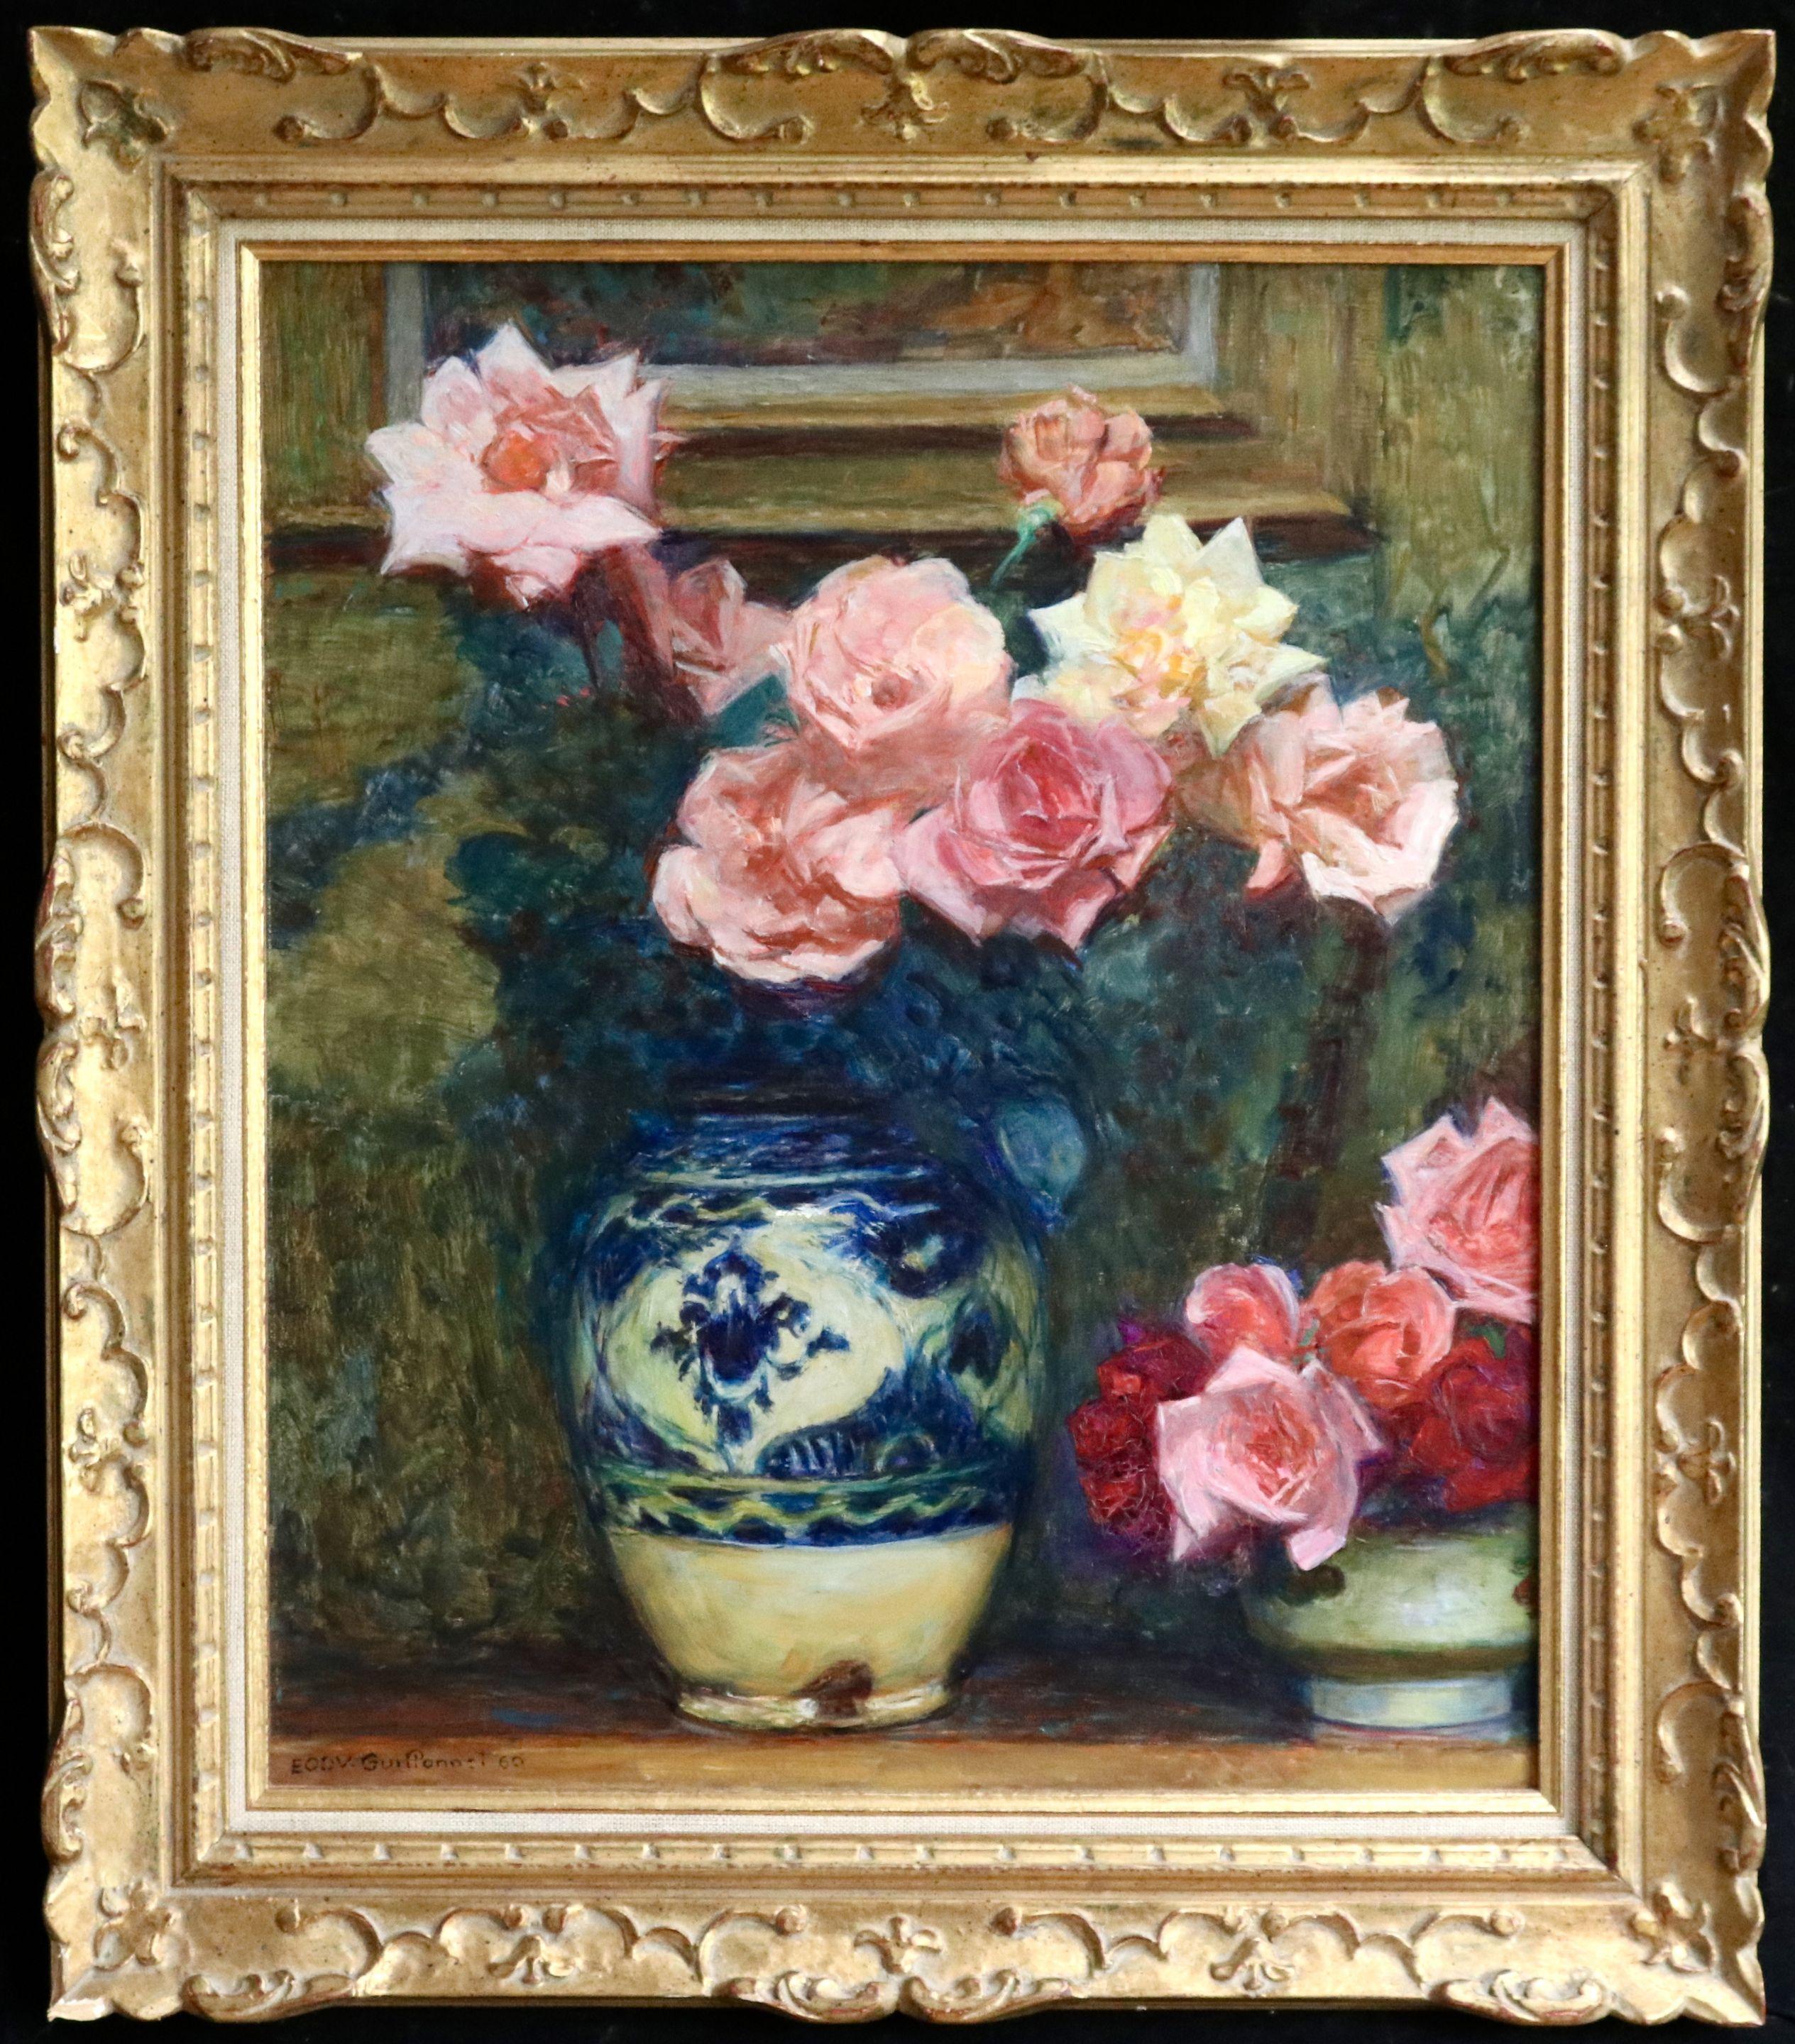 Oil on original canvas by Emile Octave Denis Victor Guillonnet depicting pink roses in a blue and white vase on a table with a frame hanging behind it. Signed lower left and dated 1960. Framed dimensions are 28 inches high by 24 inches wide.

Émile